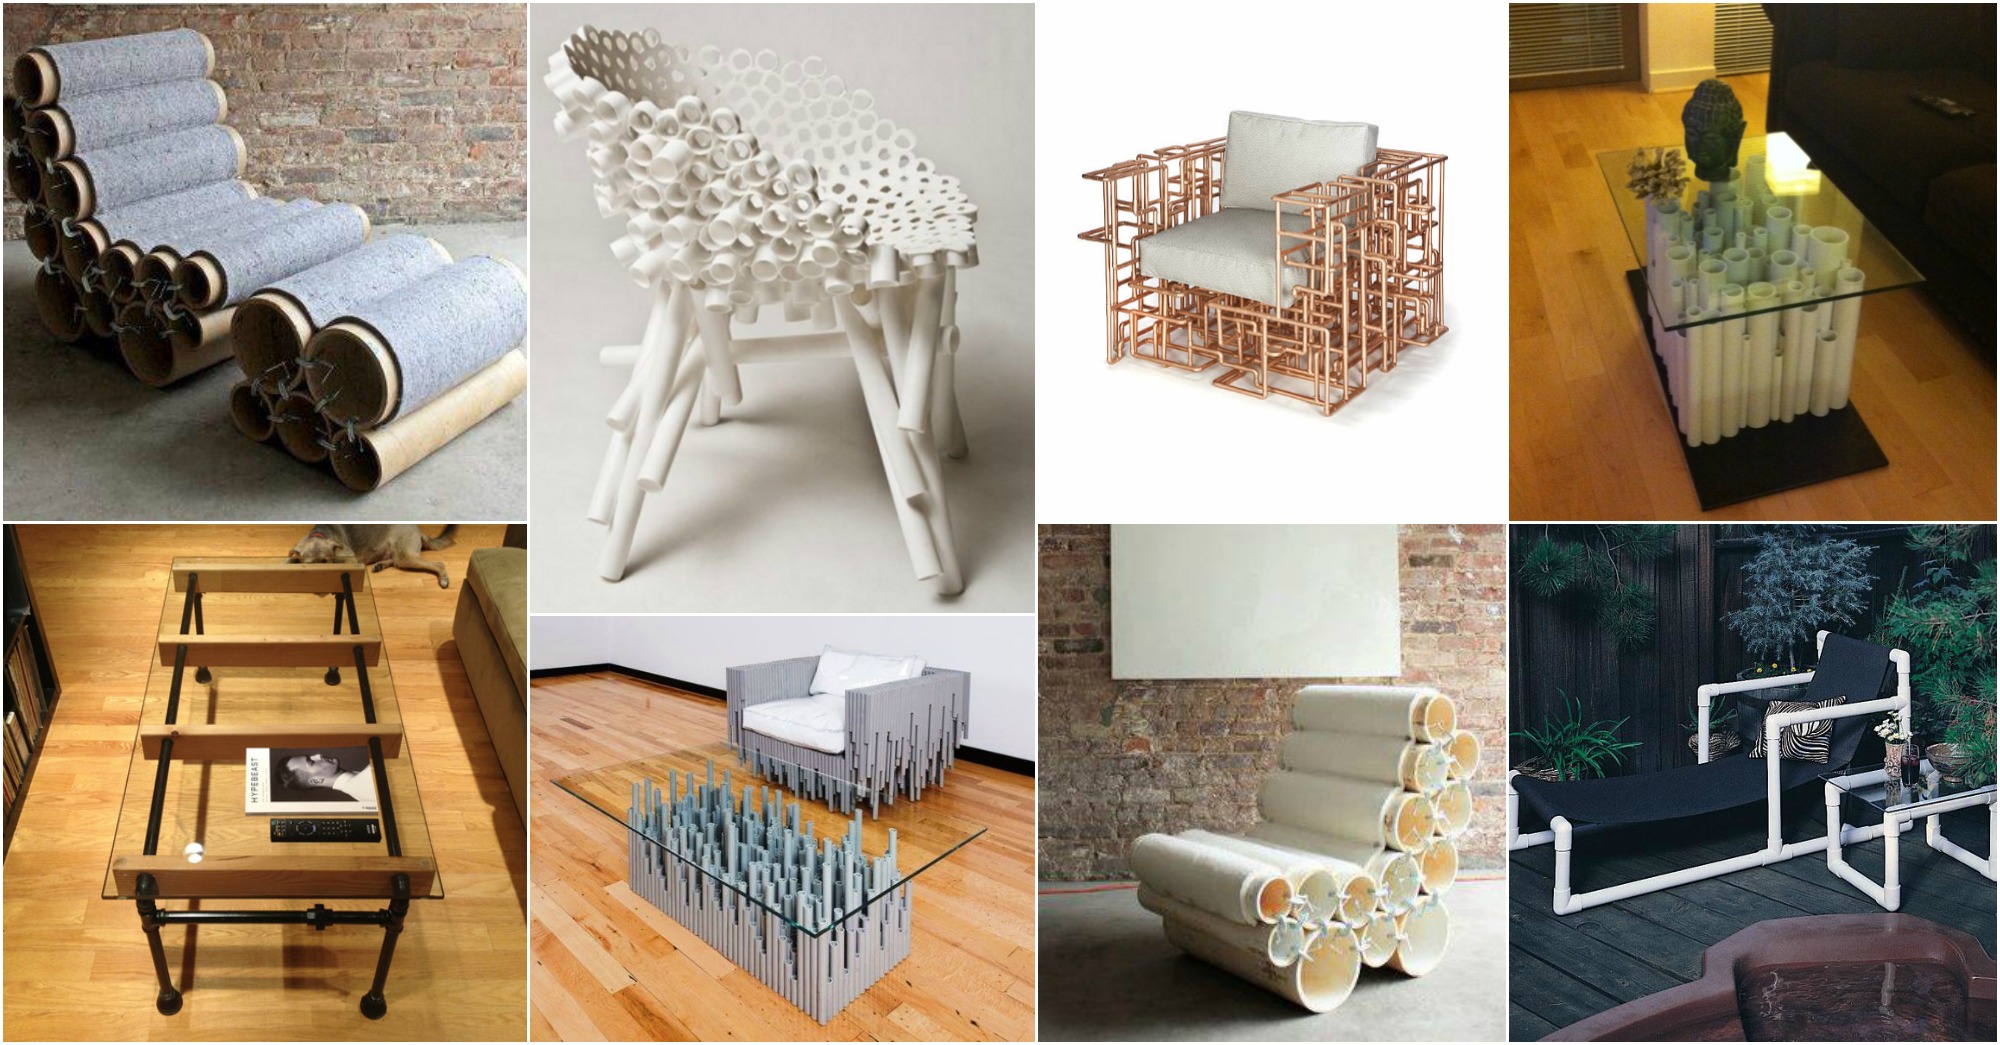 16 Pvc Pipes Furniture Ideas That Will Fascinate You